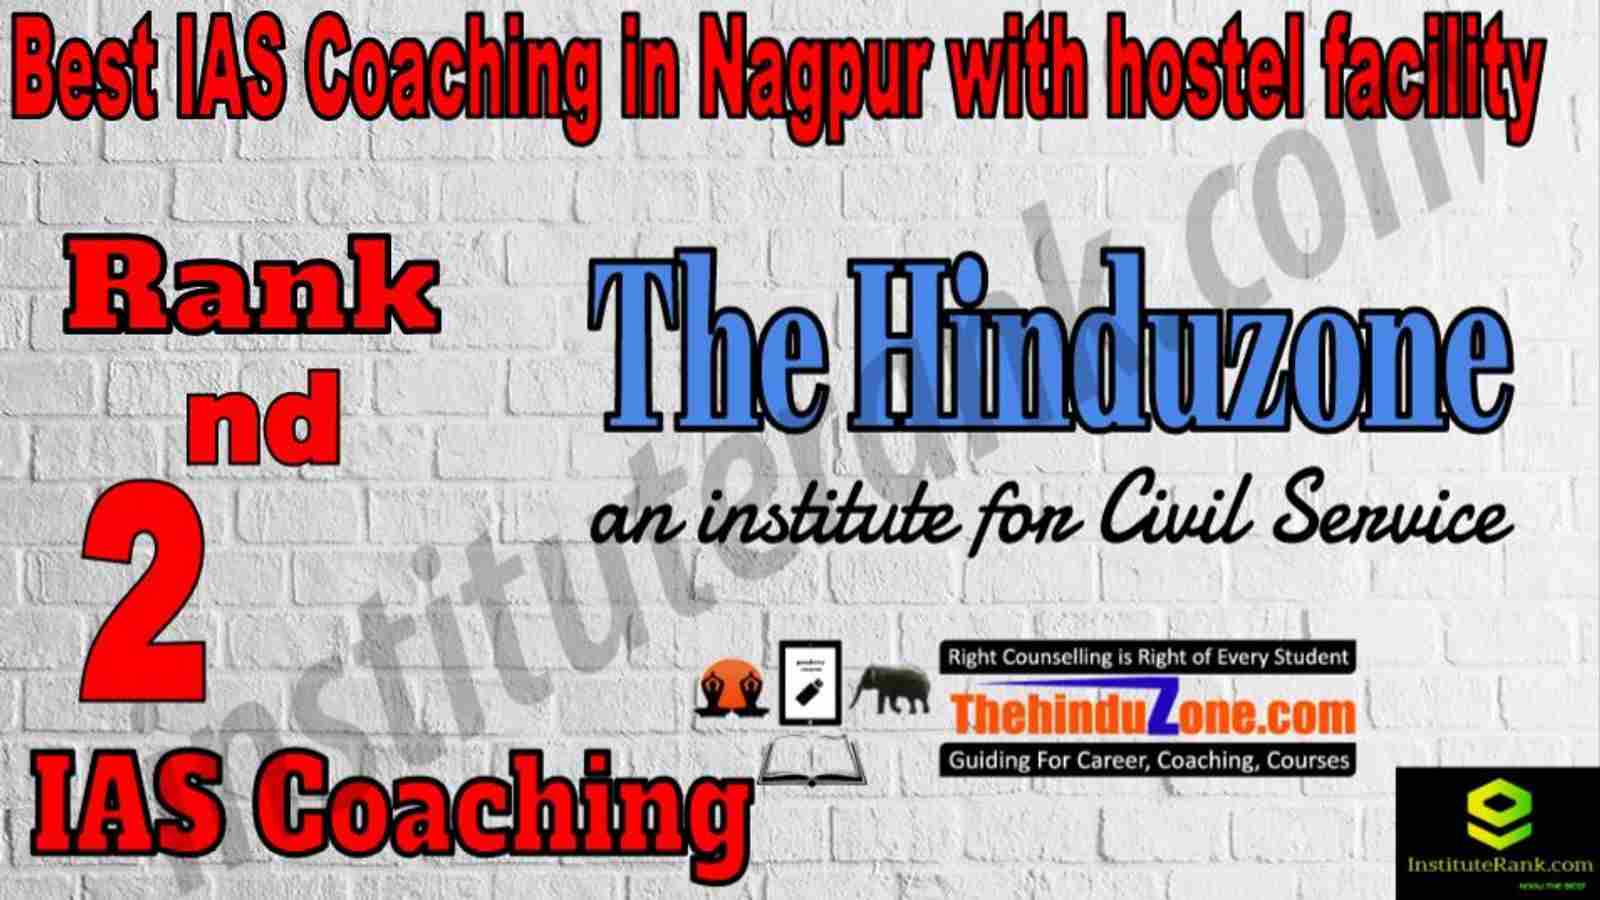 2nd Best IAS Coaching in Nagpur with hostel facility